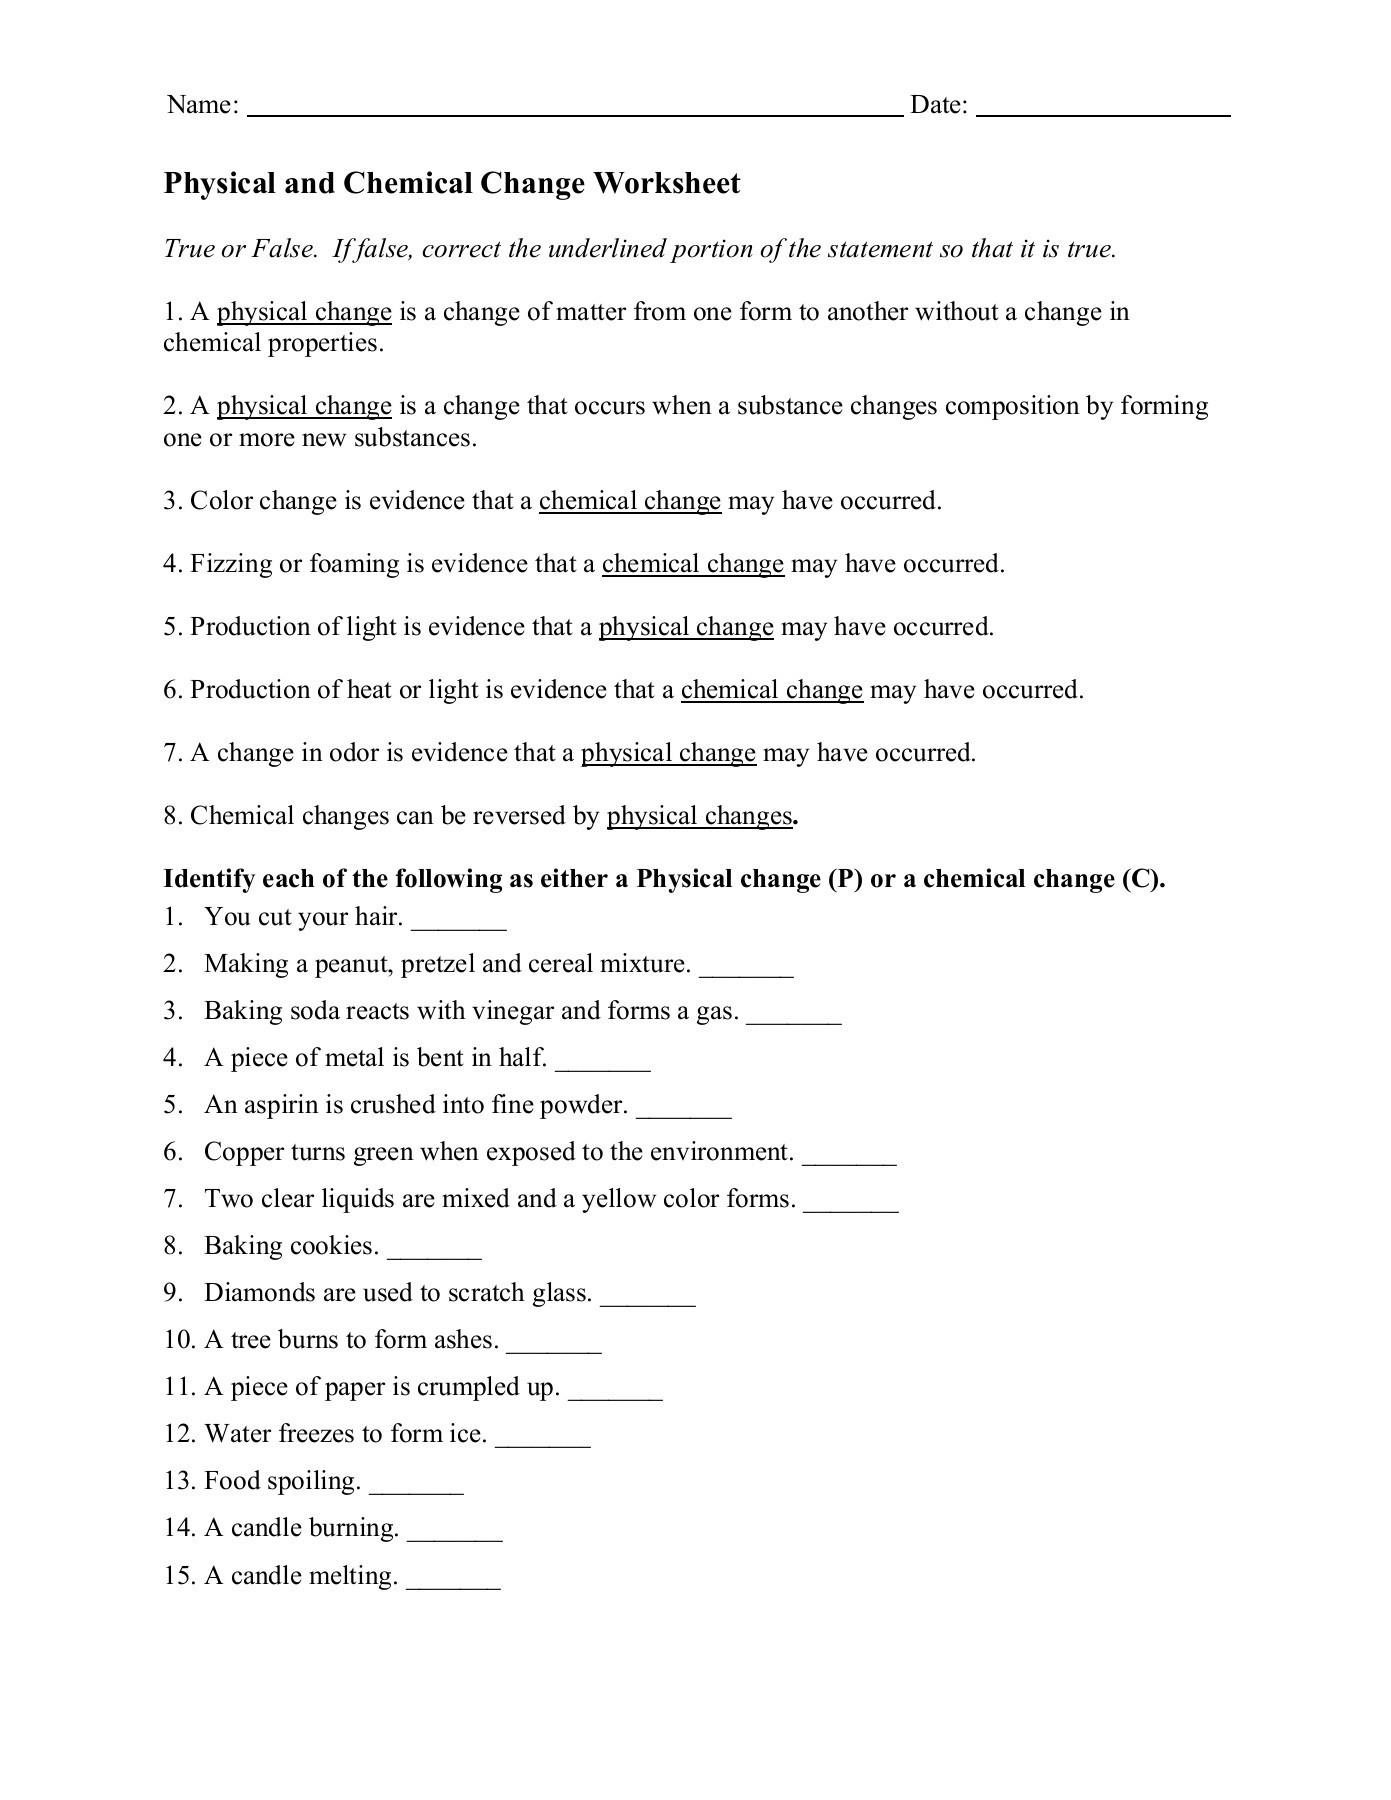 Physical and Chemical Change Worksheet Physical and Chemical Change Worksheet